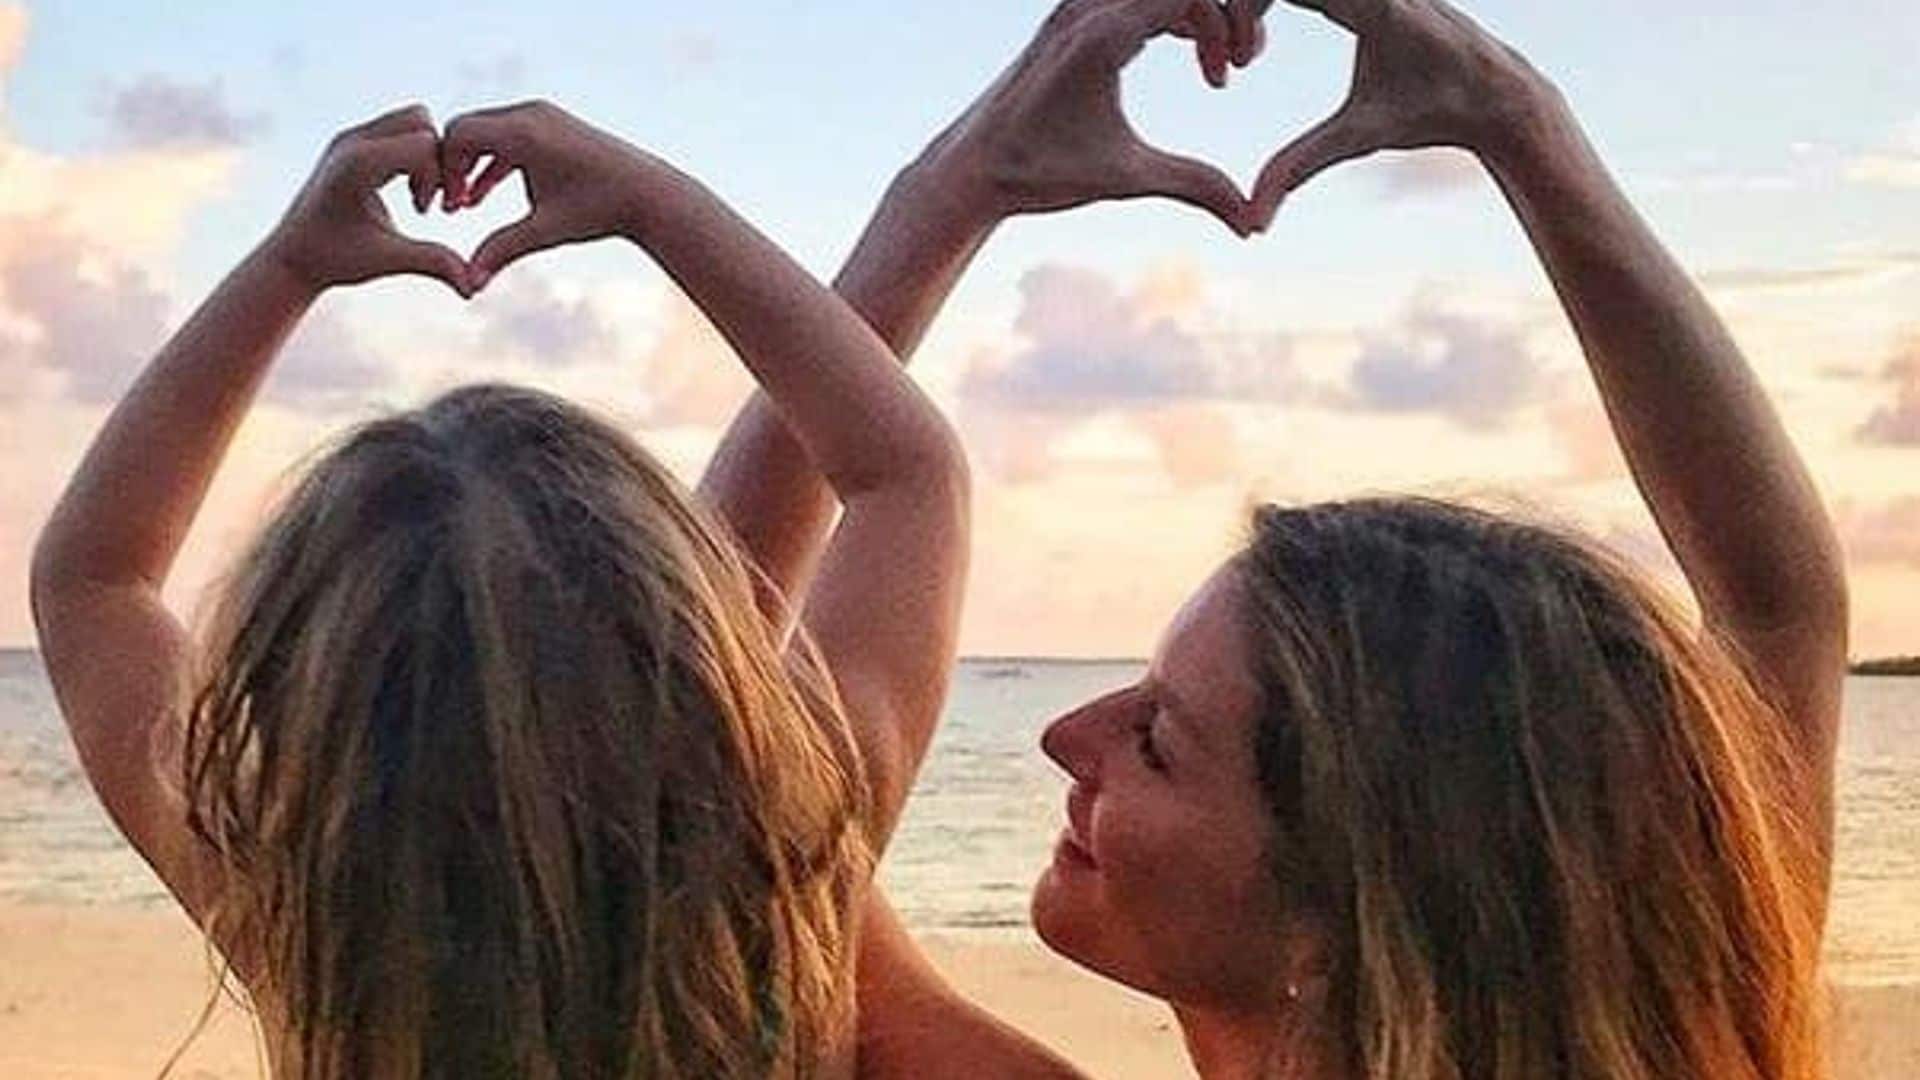 Gisele Bündchen’s ‘little yoga partner’ daughter is her twin in new photo